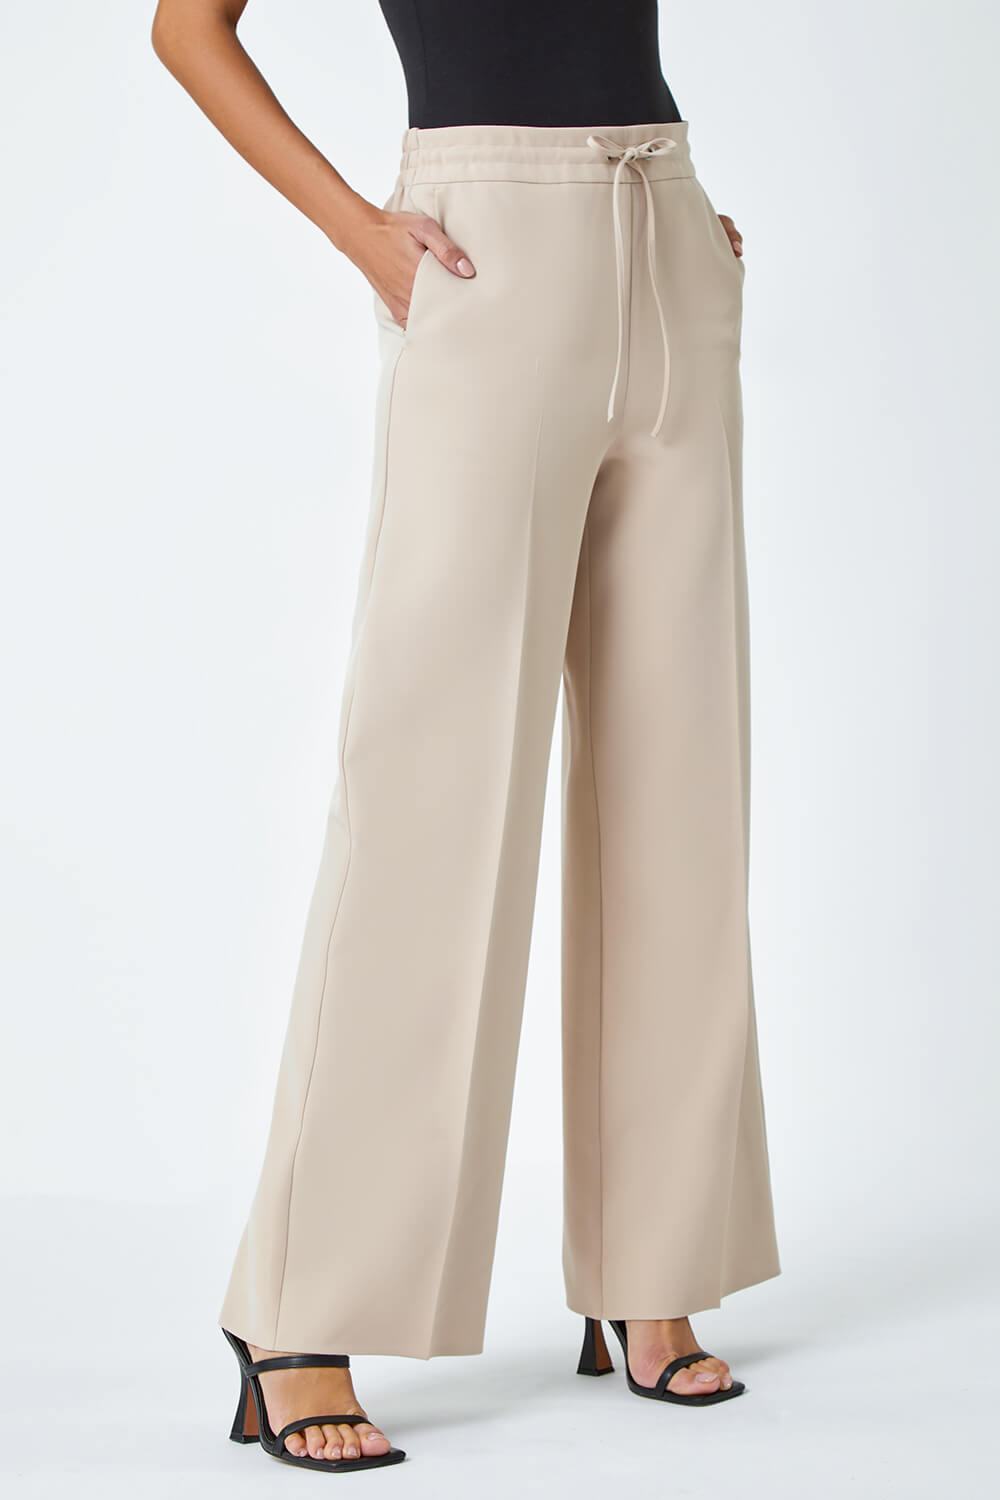 Stone Wide Leg Tie Front Stretch Trouser, Image 4 of 5